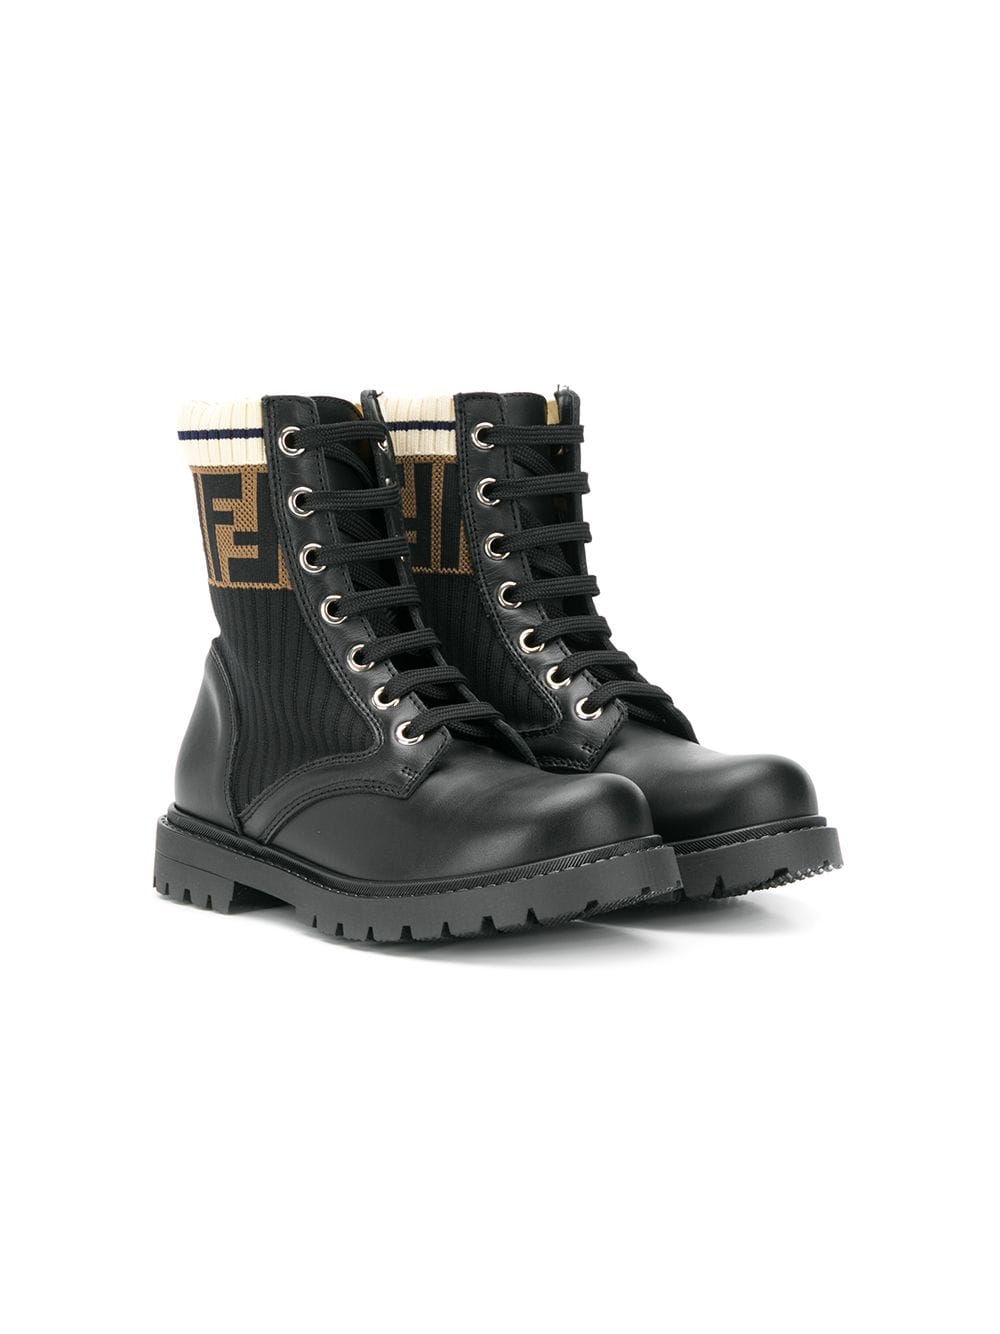 Here's Where You Can Get Blue Ivy's Fendi Boots | Essence